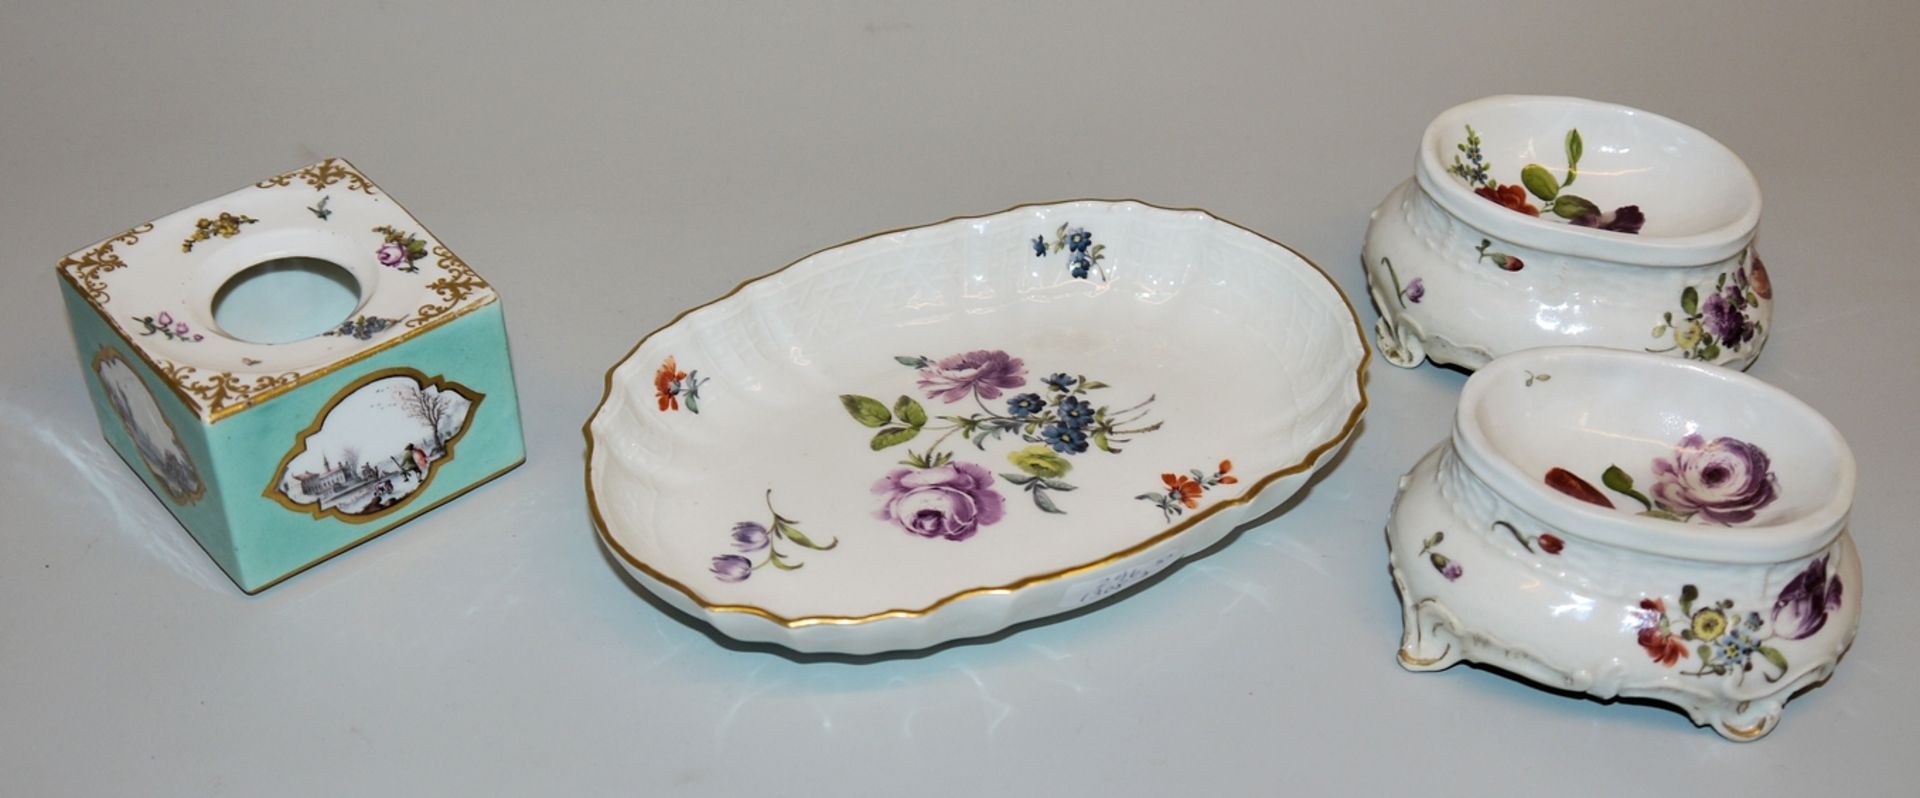 5 x fine porcelain, Ludwigsburg and Meissen from 1750